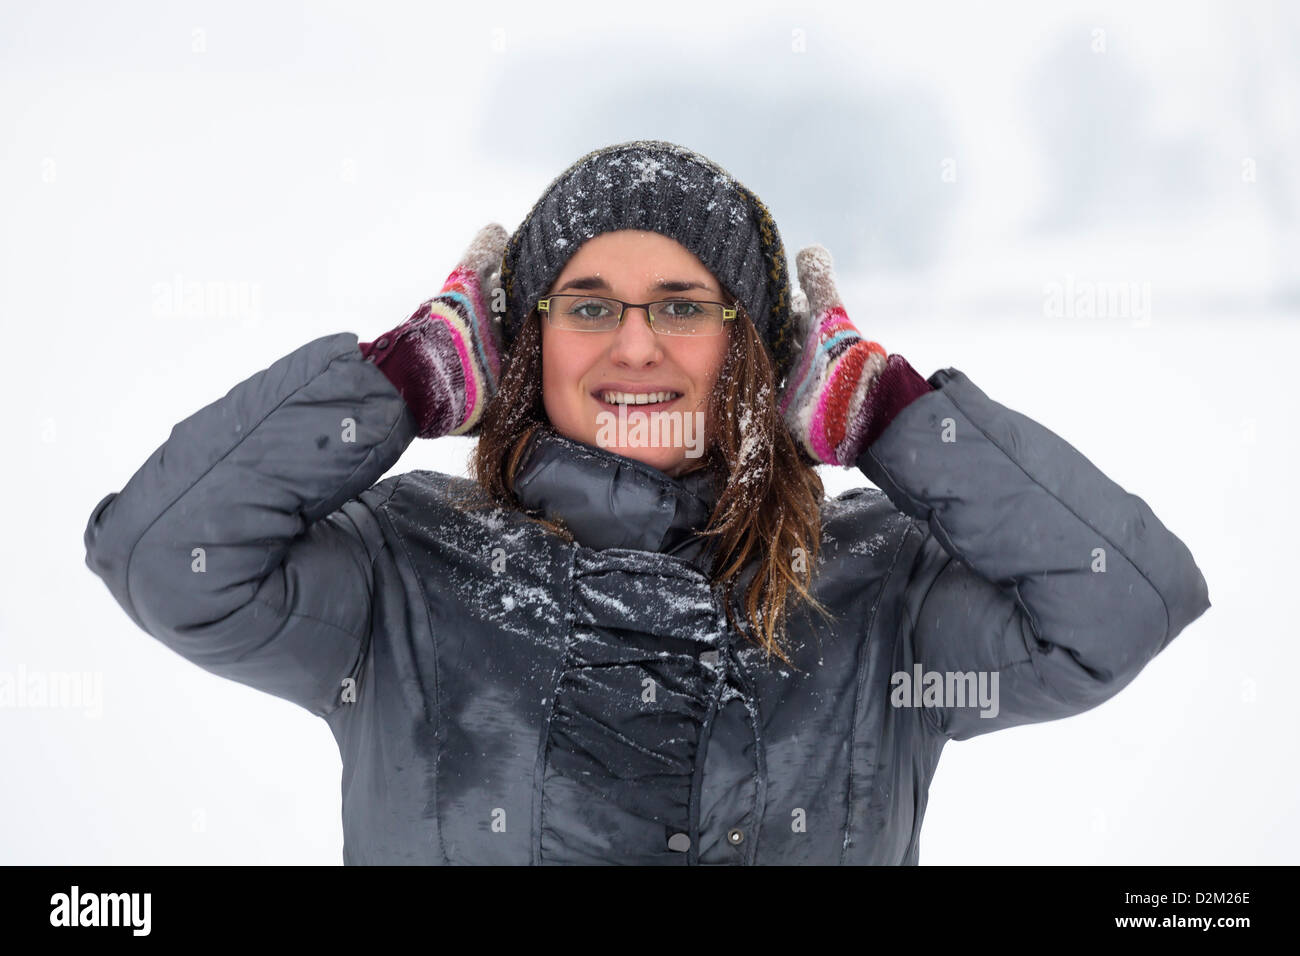 Young happy woman enjoying snow and winter outdoors. Stock Photo